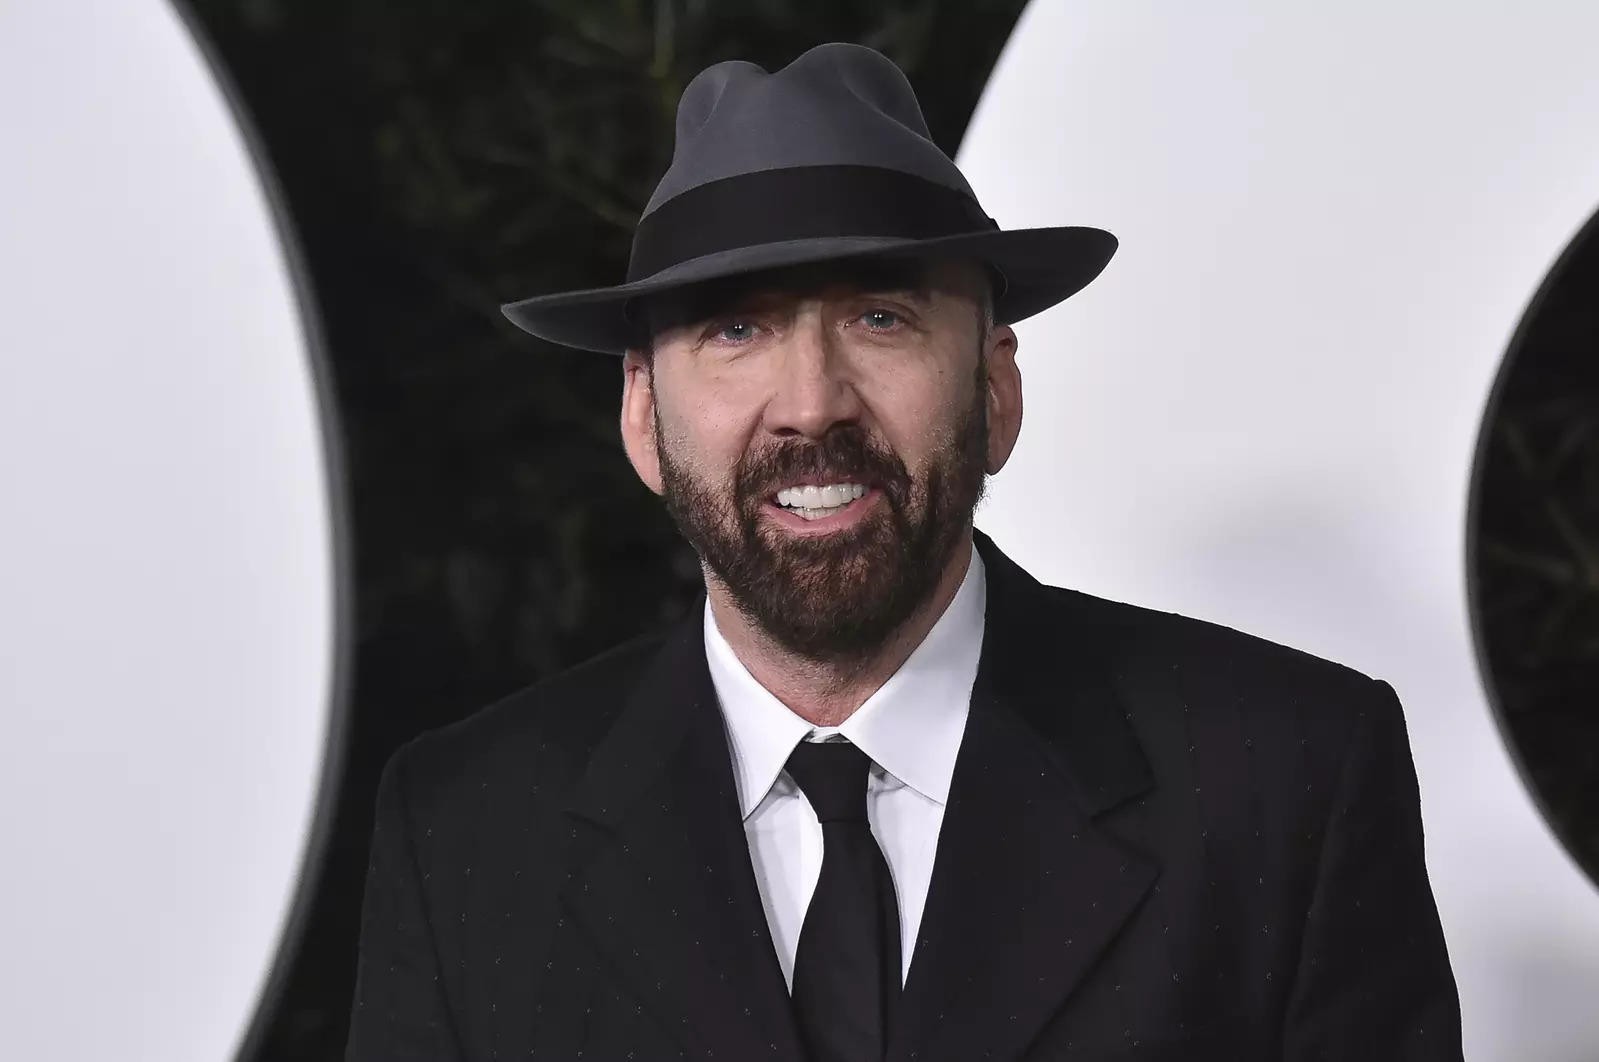 Nicolas Cage owned a $6 million debt to IRS